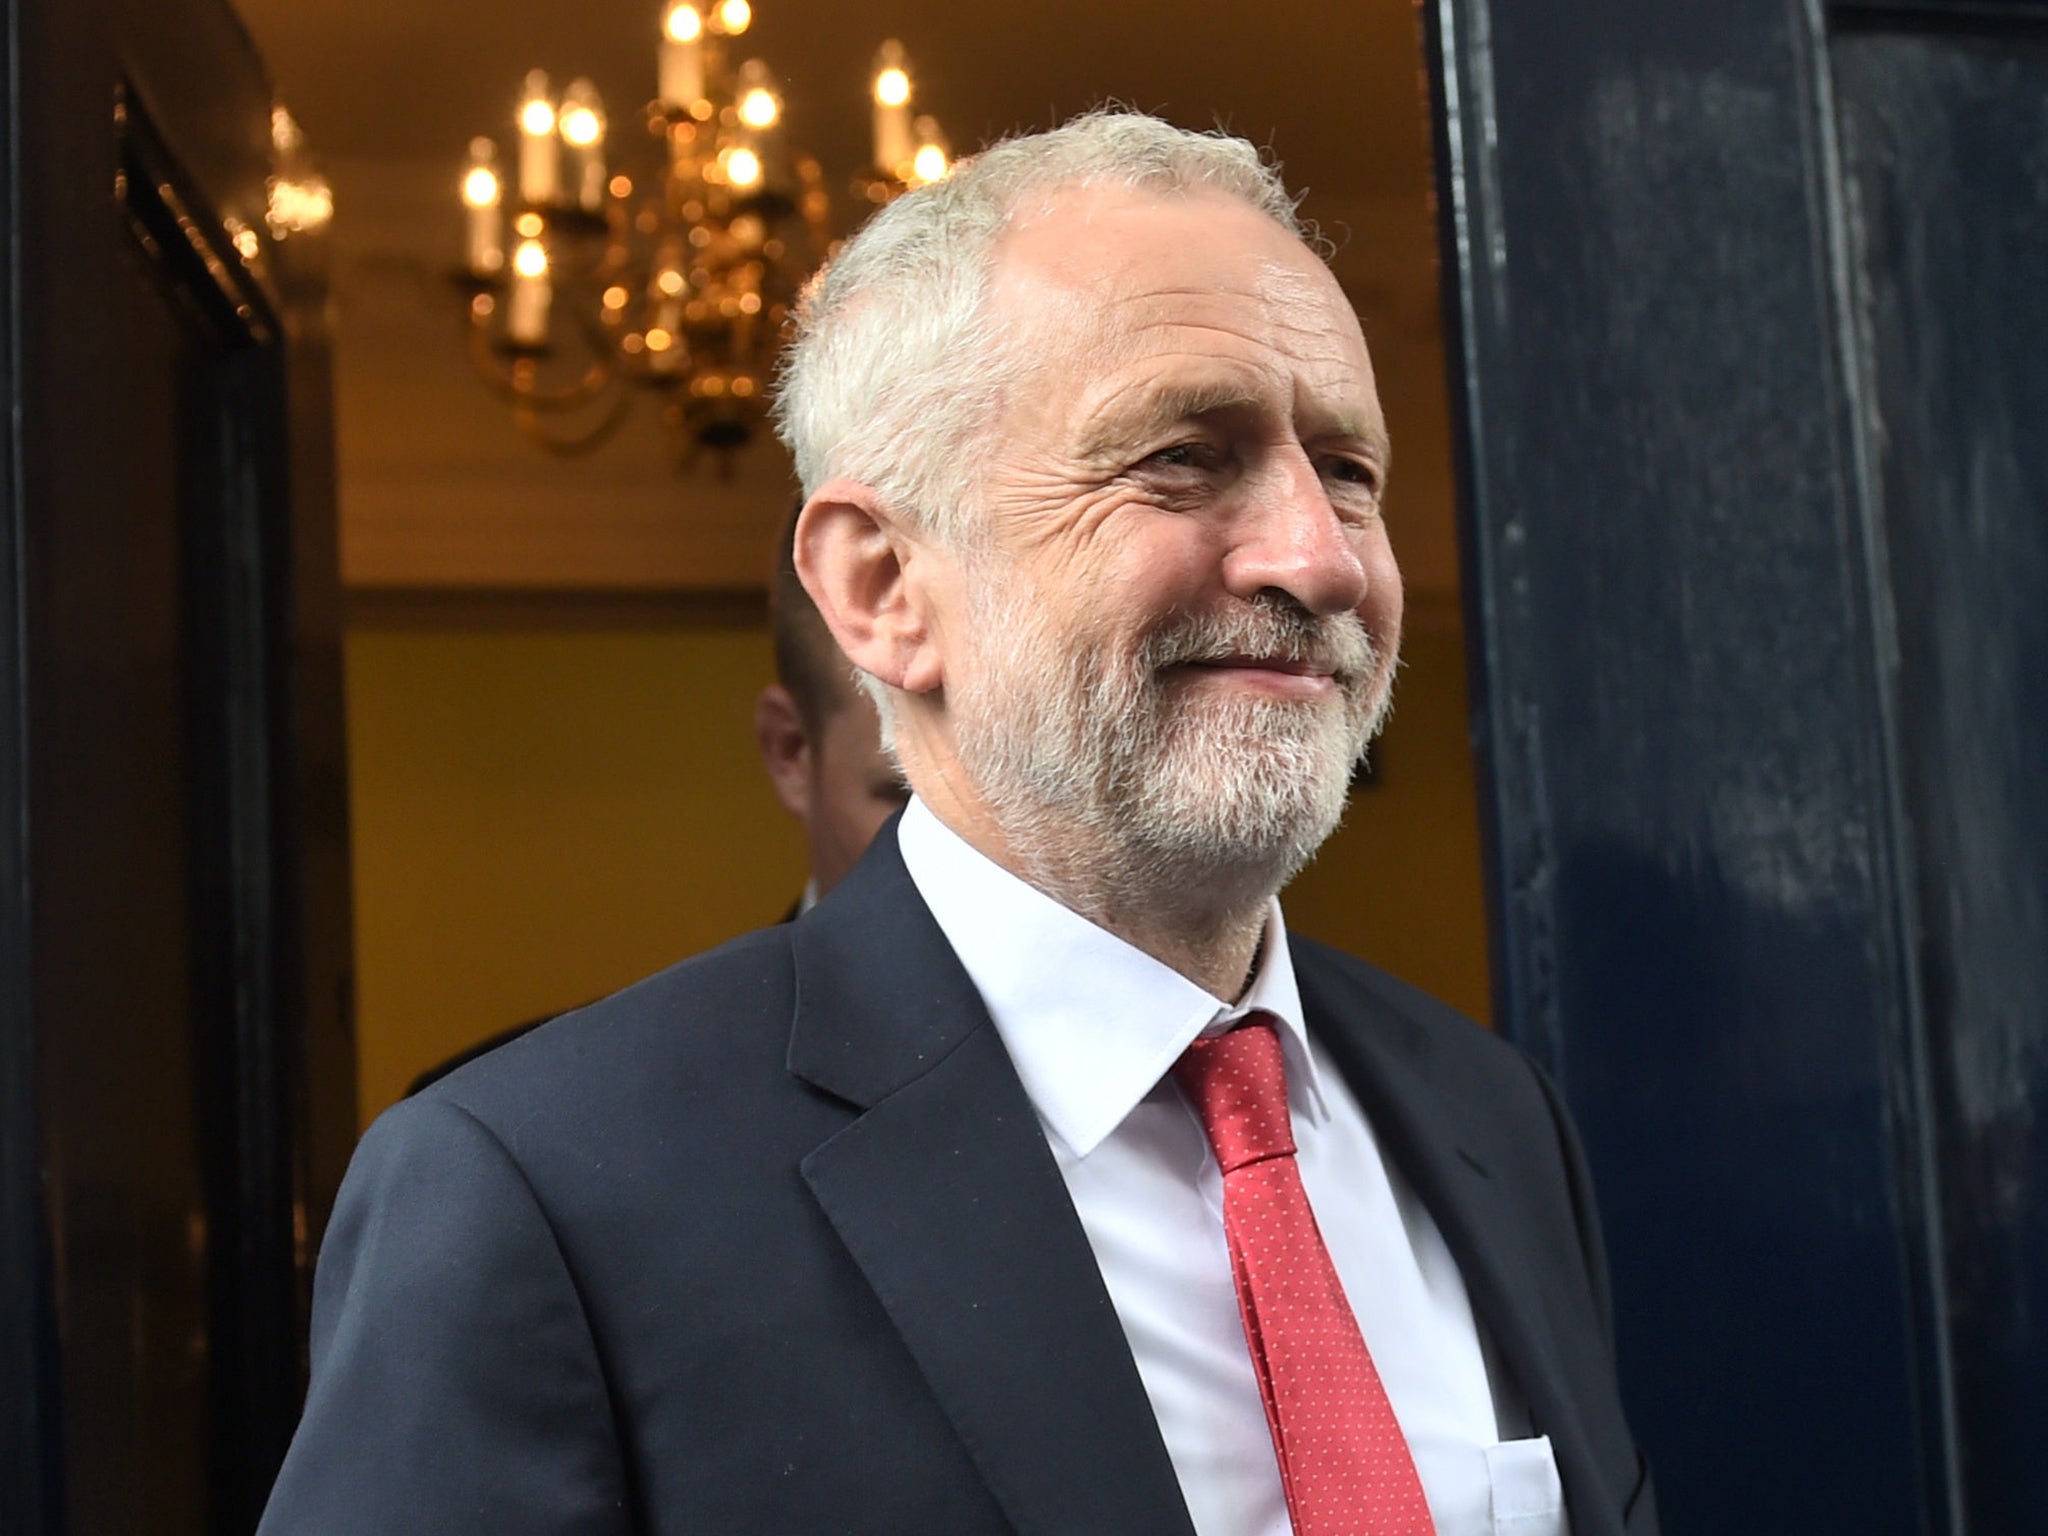 Labour leader Jeremy Corbyn leaves Chatham House in London after speaking about national security and foreign policy